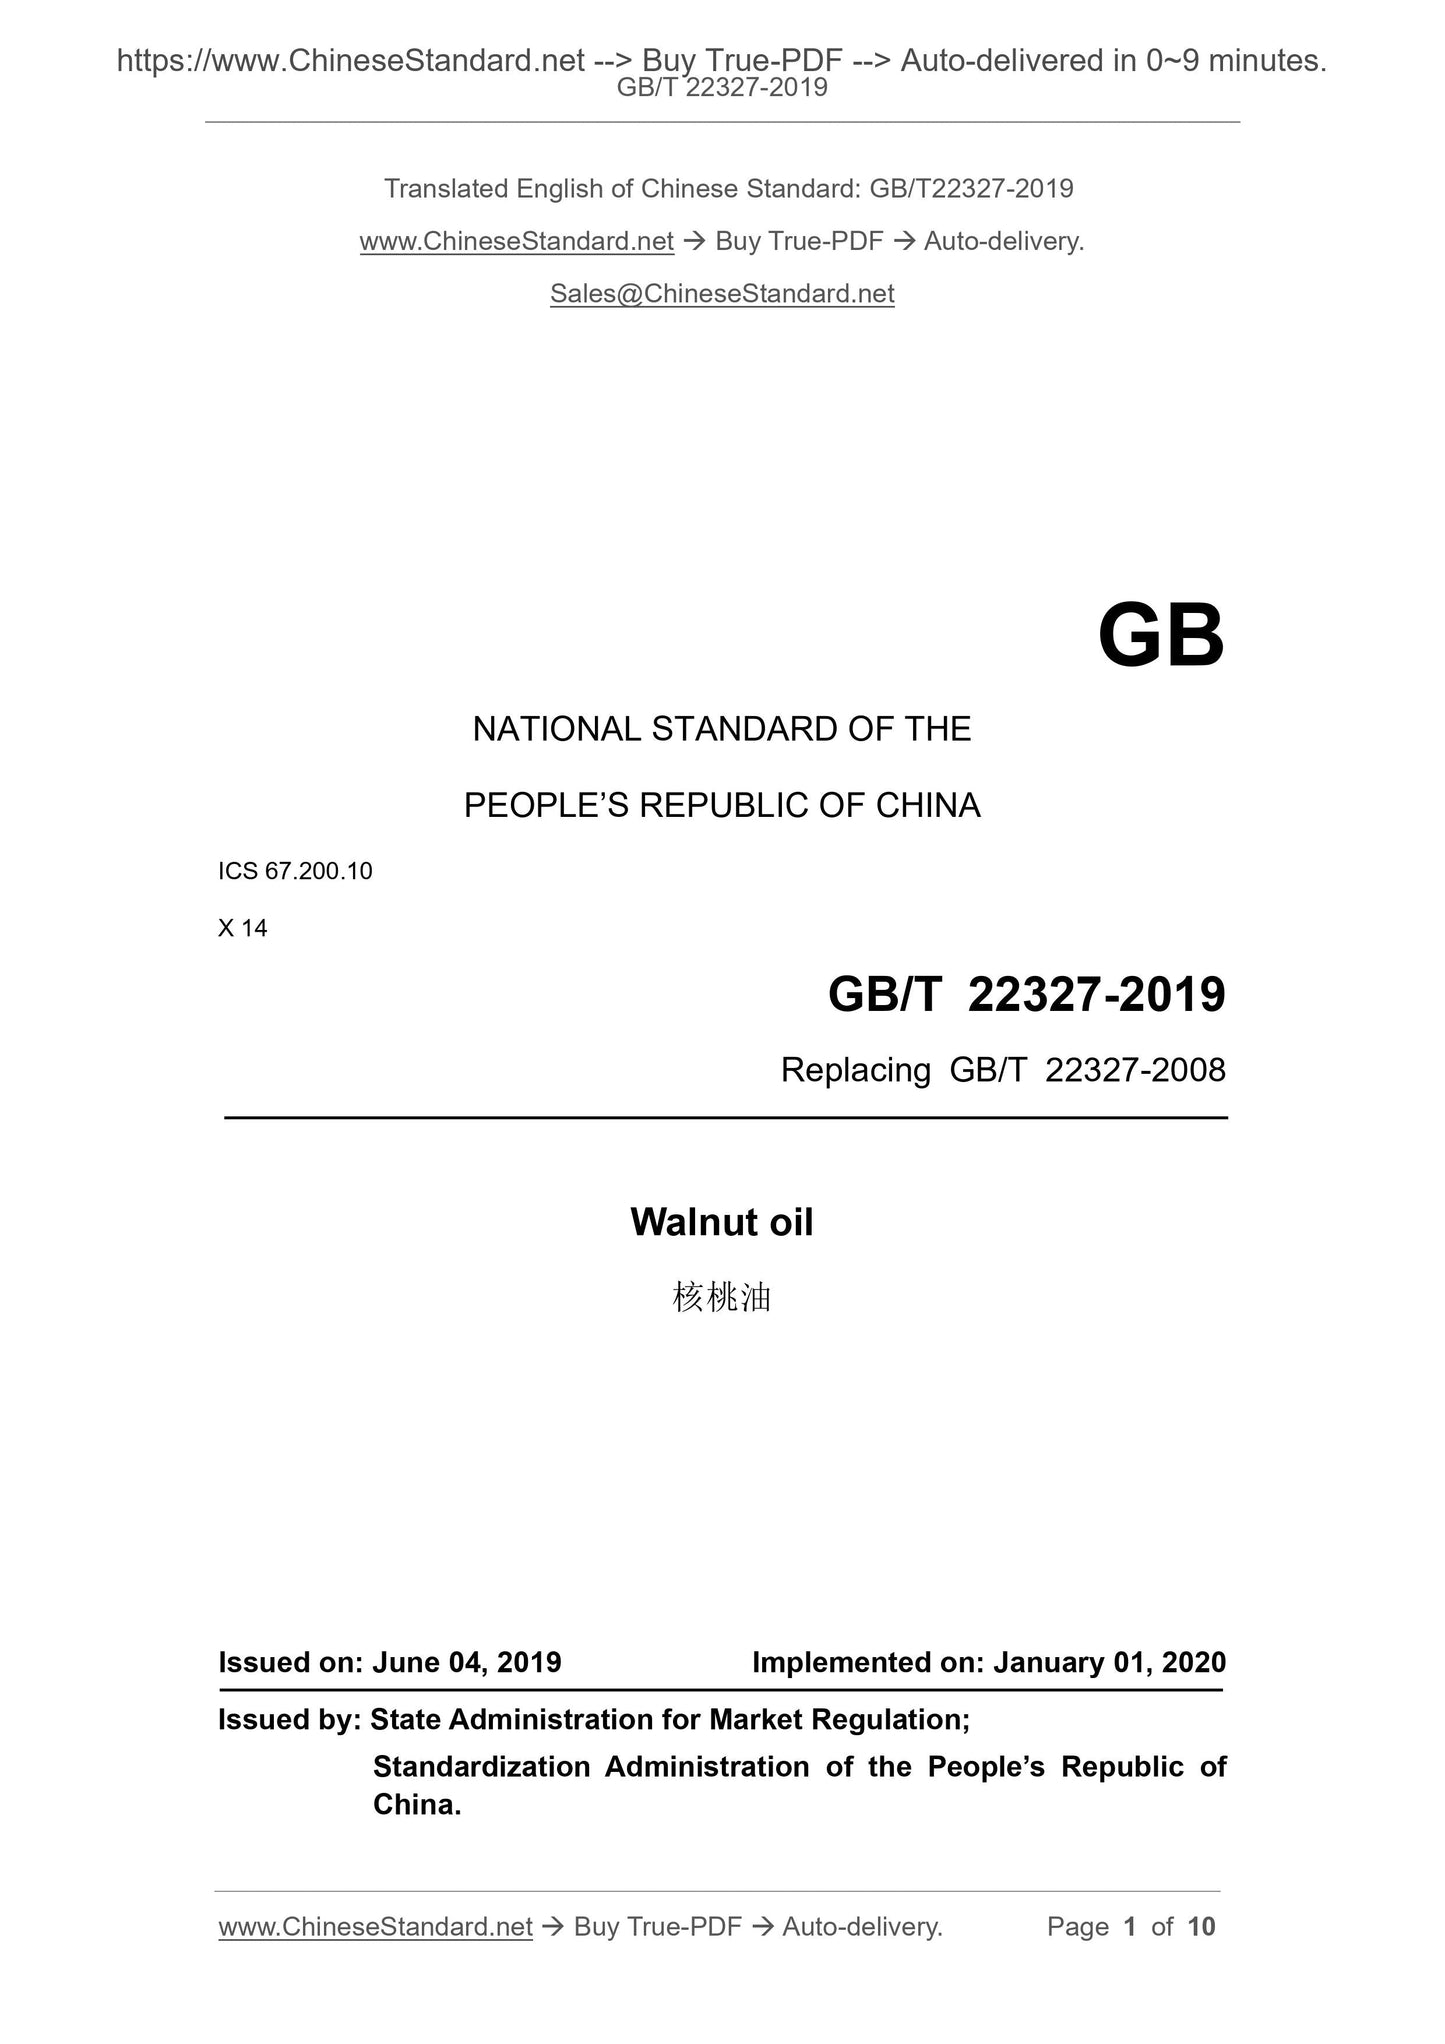 GB/T 22327-2019 Page 1